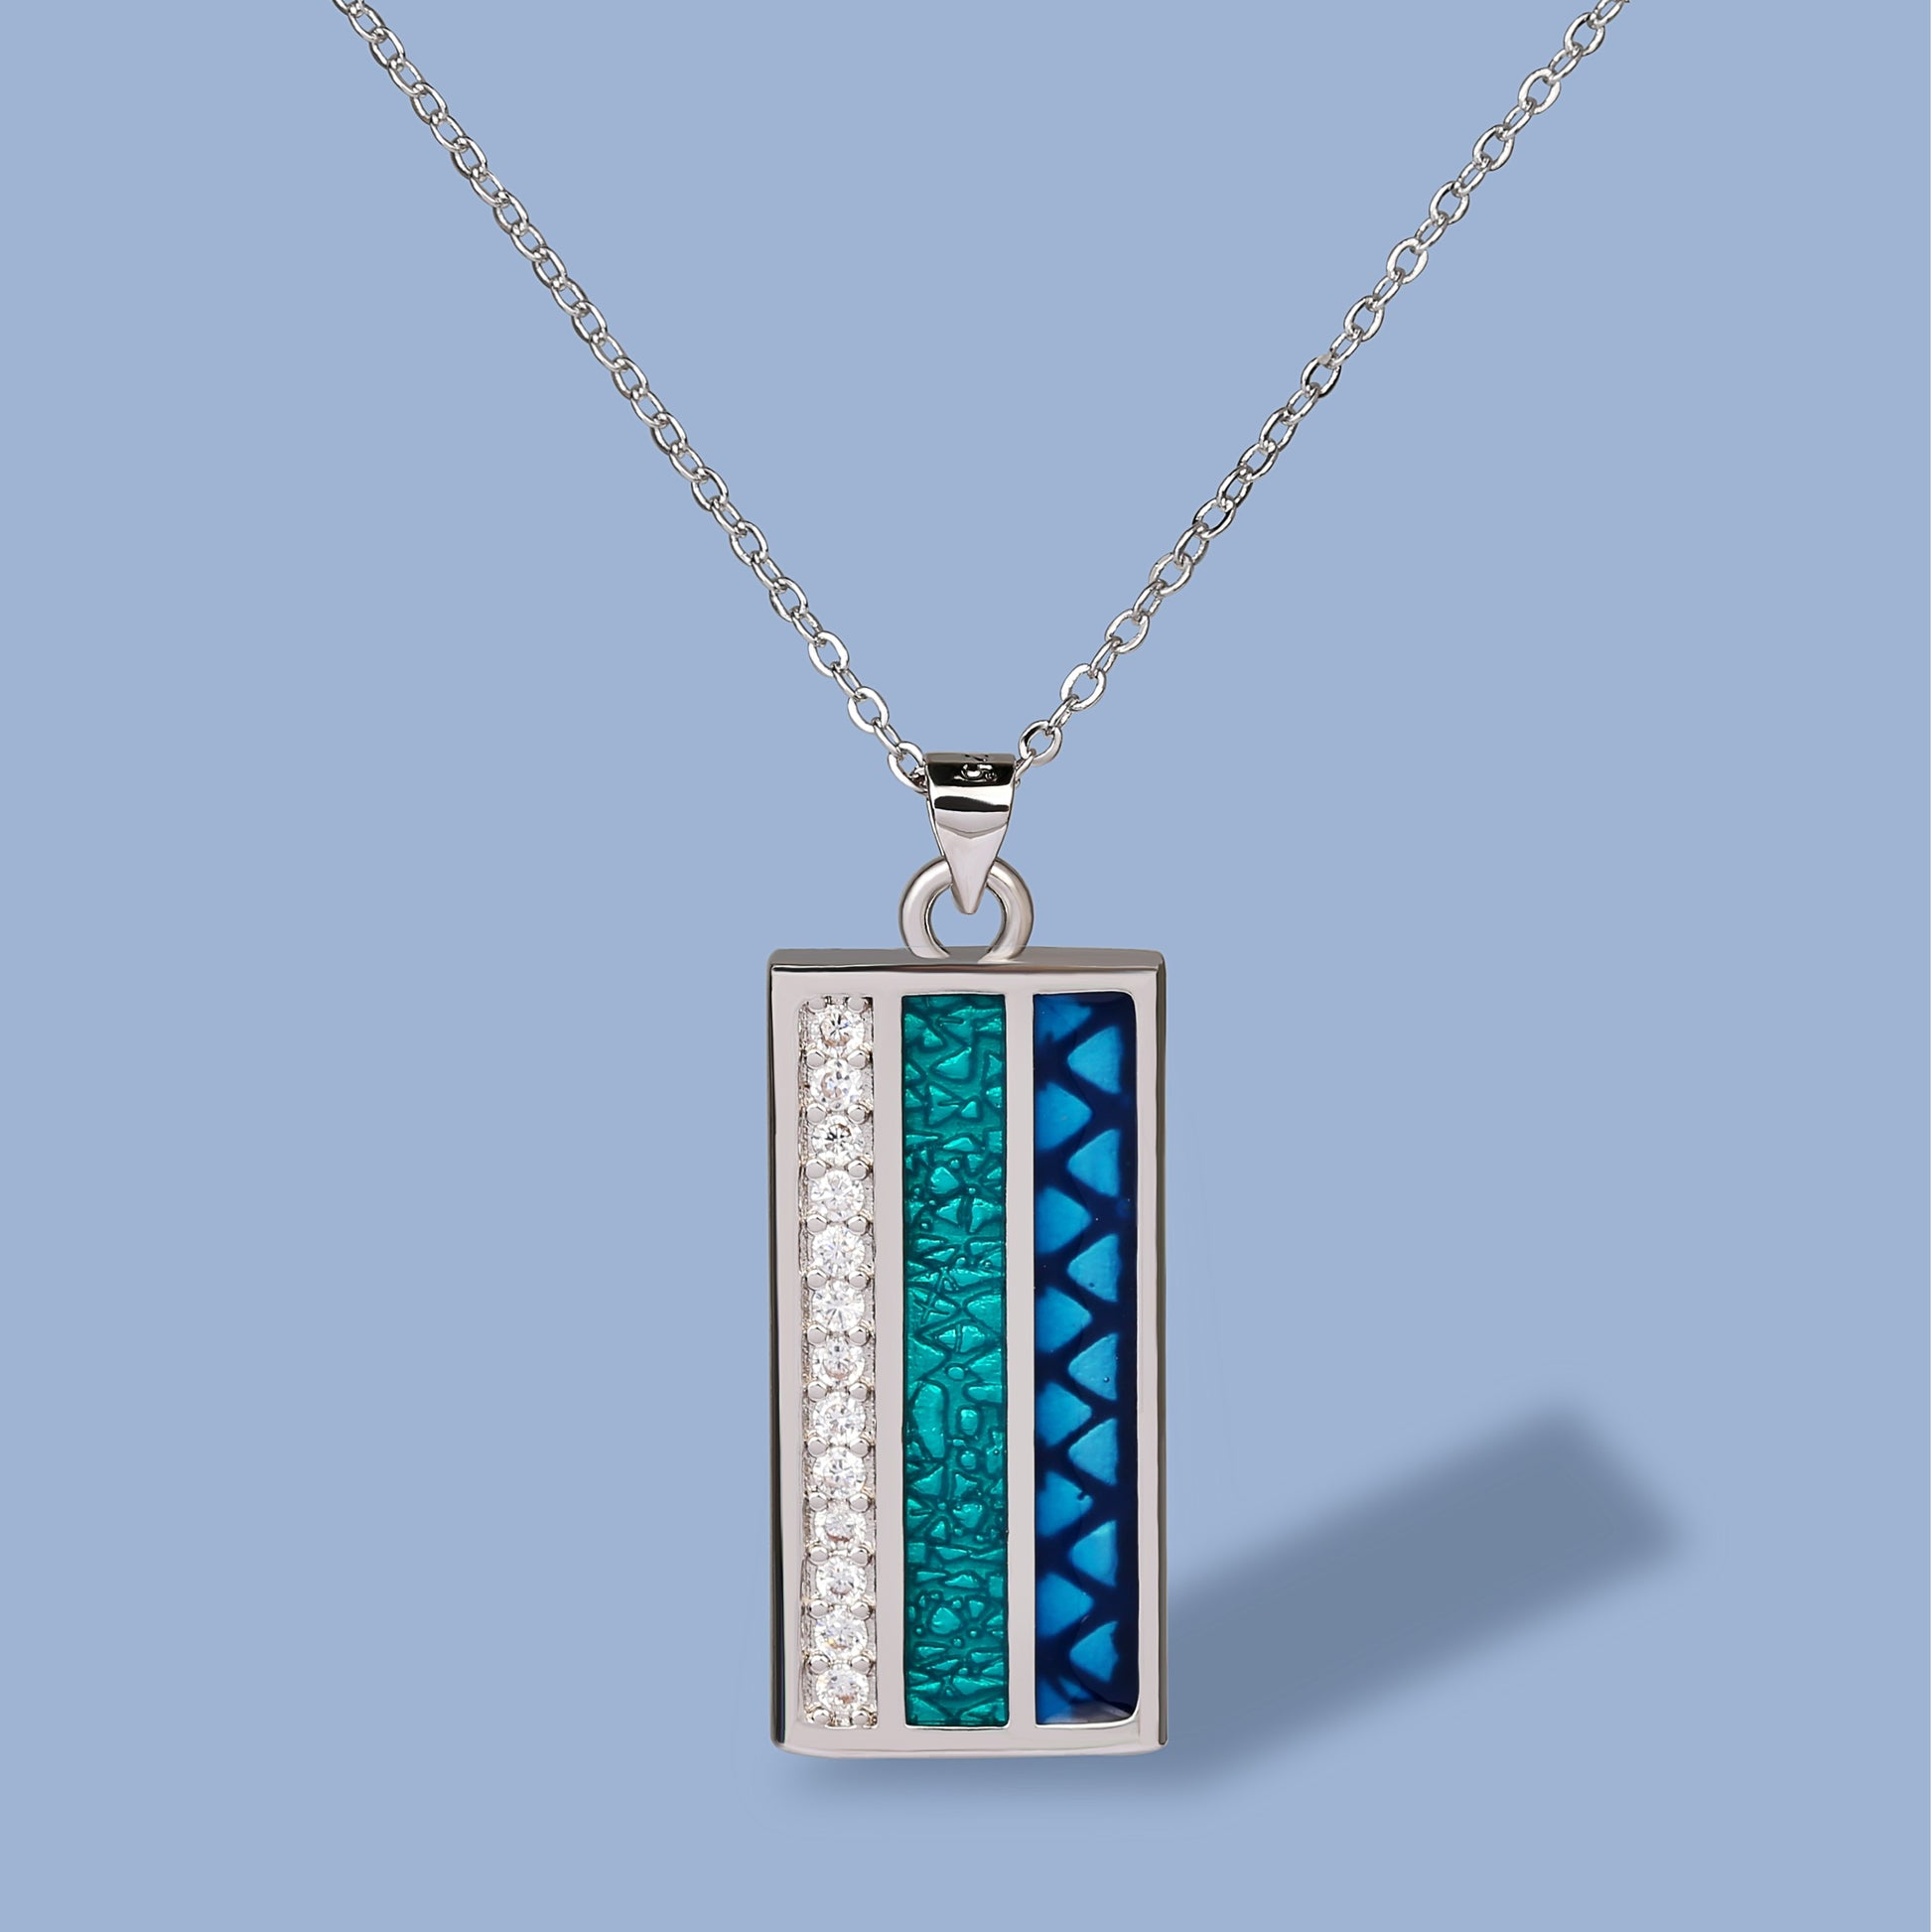 Chic Enamel Pendant Necklace for women with  Zircon fashion-forward in 925 Silver